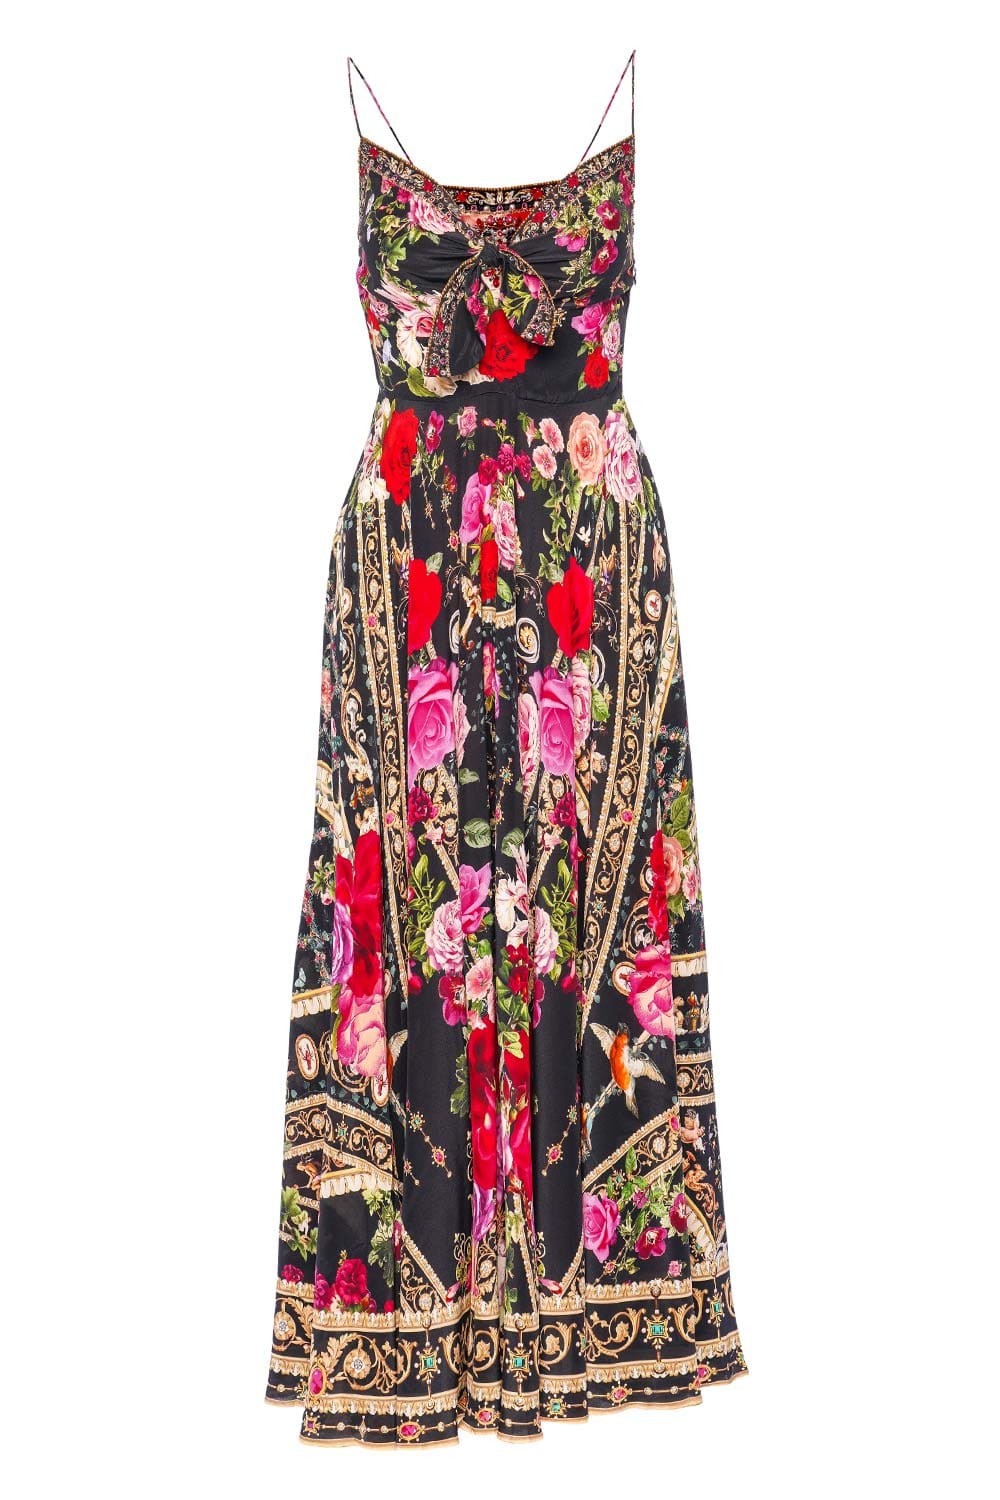 Camilla Reservation for Love Tie Front Maxi Dress